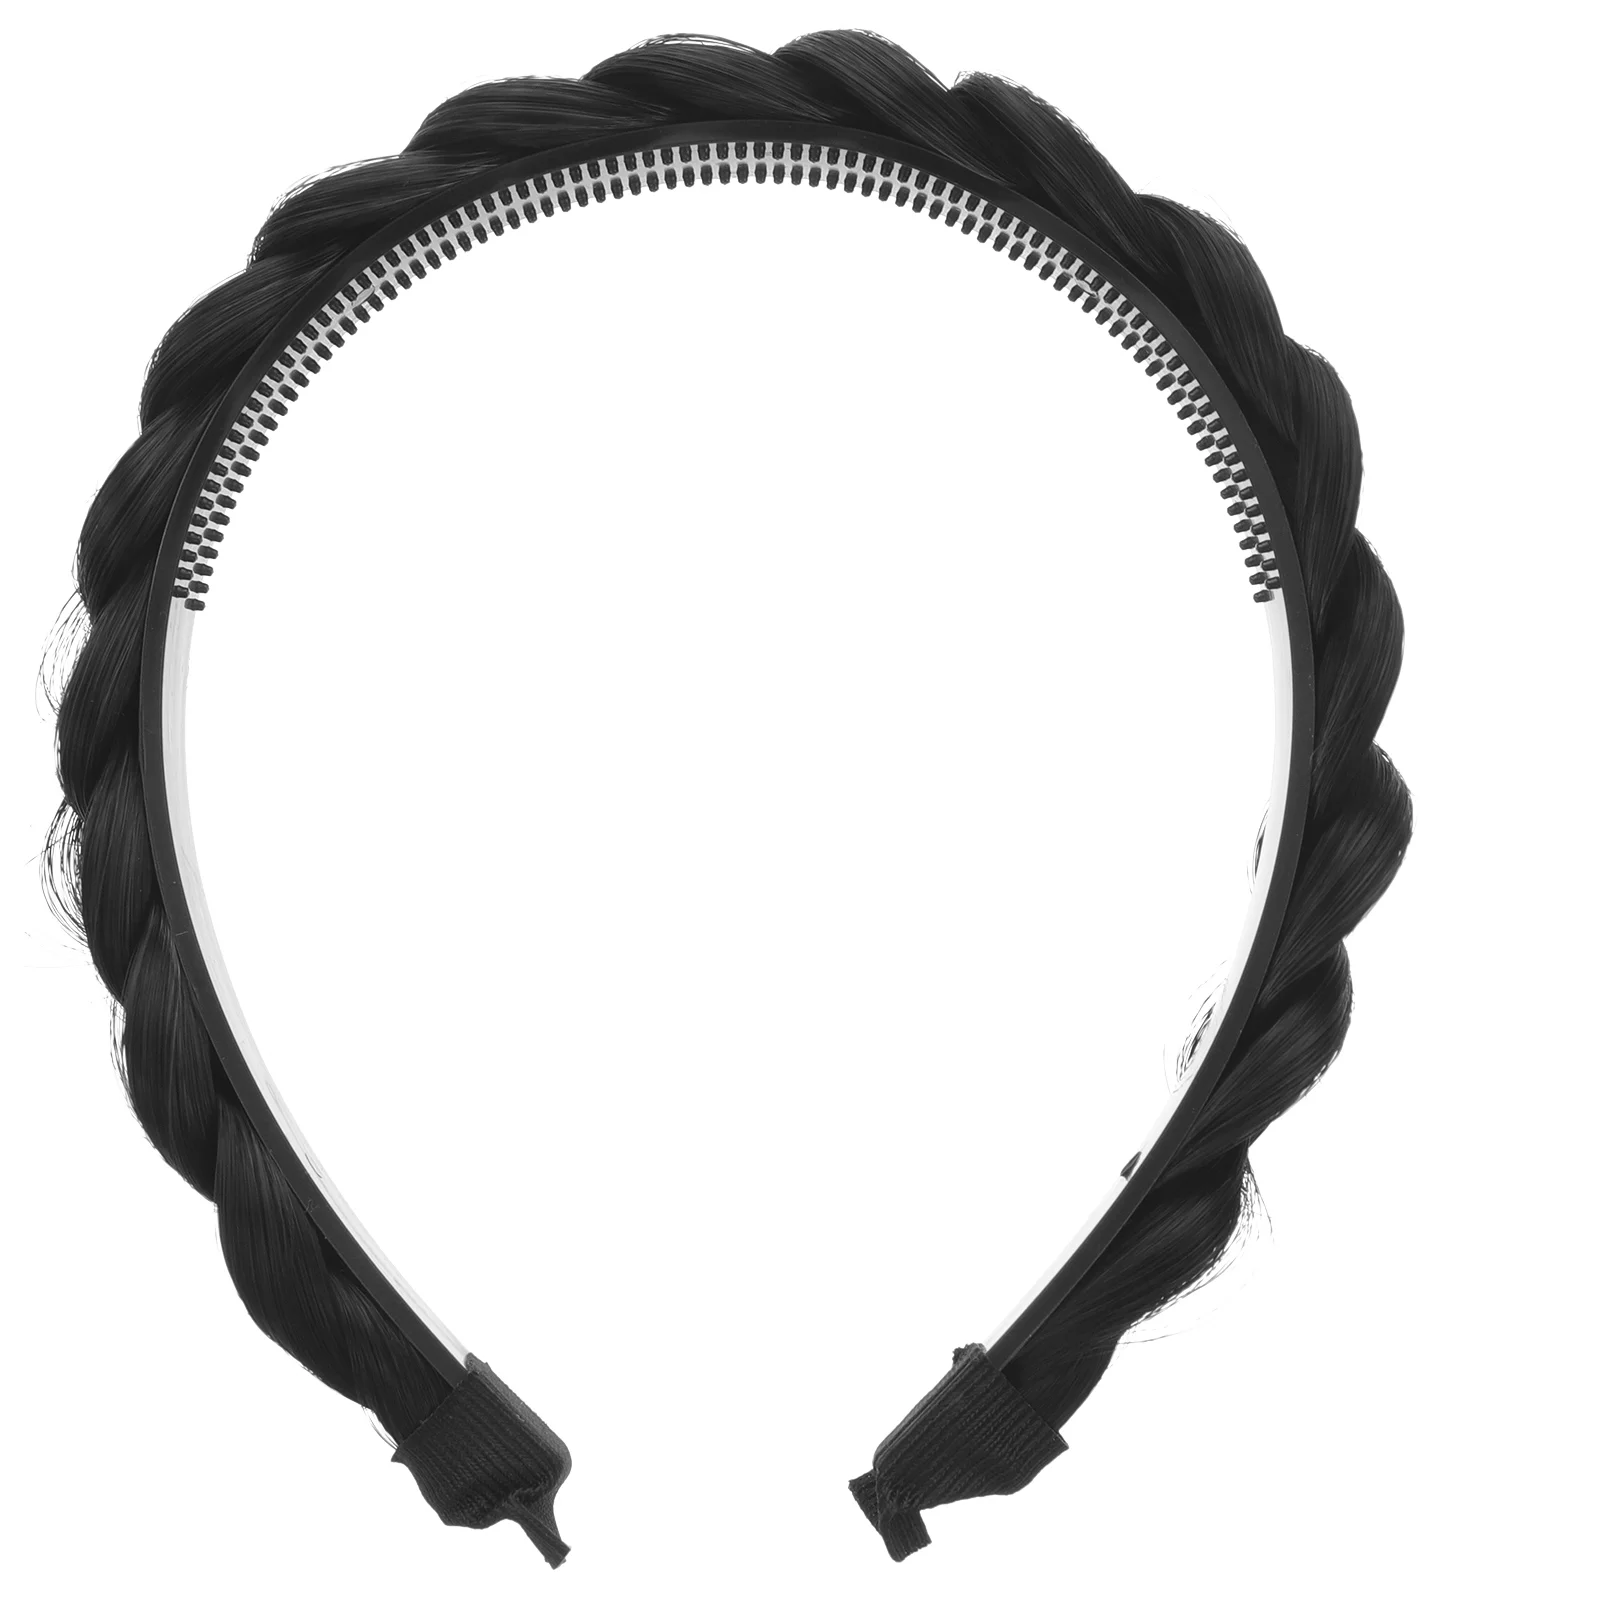 

Braid Headband Hair Claw Clips Braided Design Clasp Delicate Supply Women Hoops Fake Chemical Fiber Ornament Decorative Miss